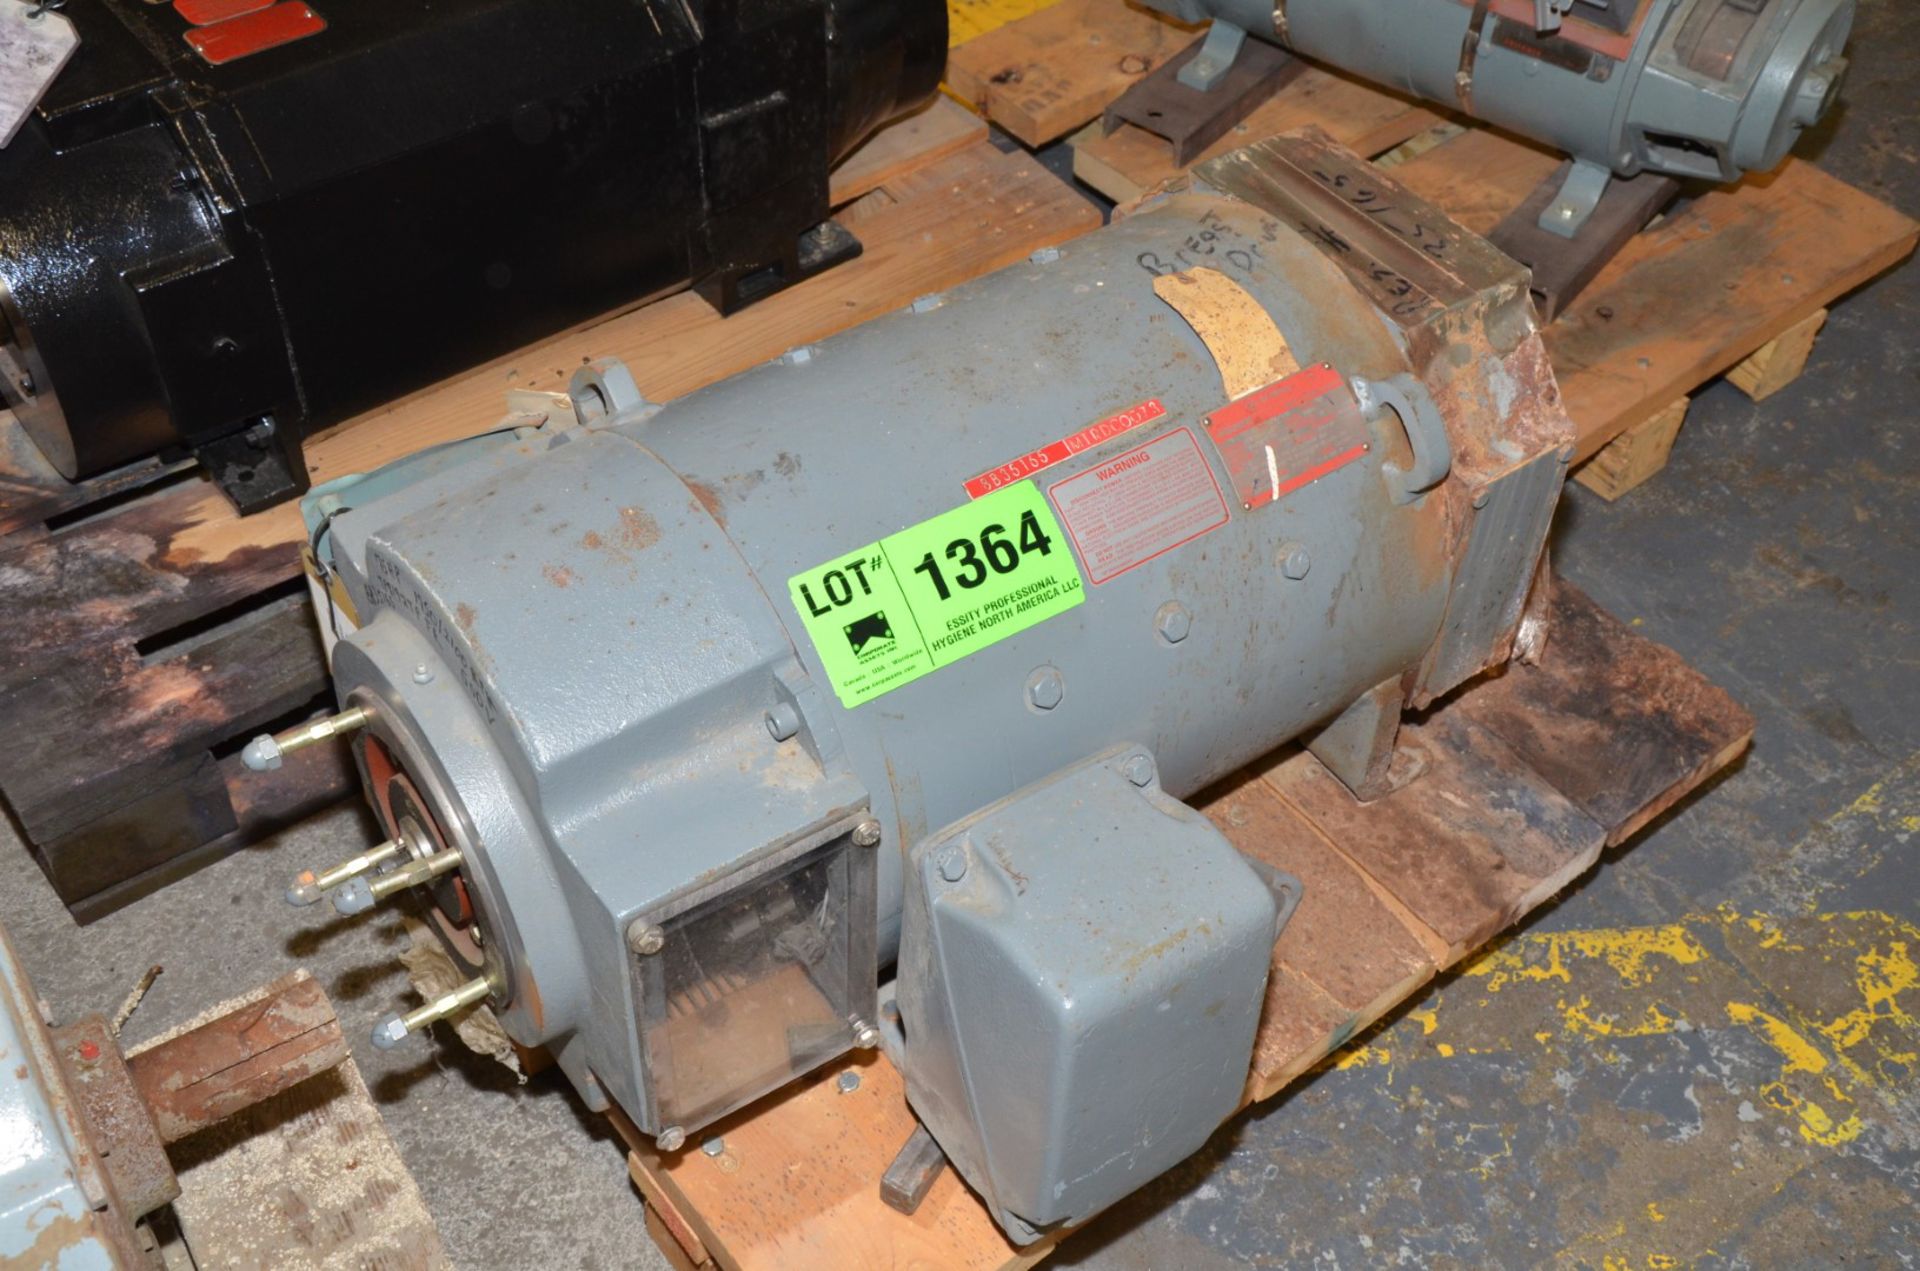 GE 75 HP 2100 RPM 460V ELECTRIC MOTOR [RIGGING FEE FOR LOT #1364 - $25 USD PLUS APPLICABLE TAXES]